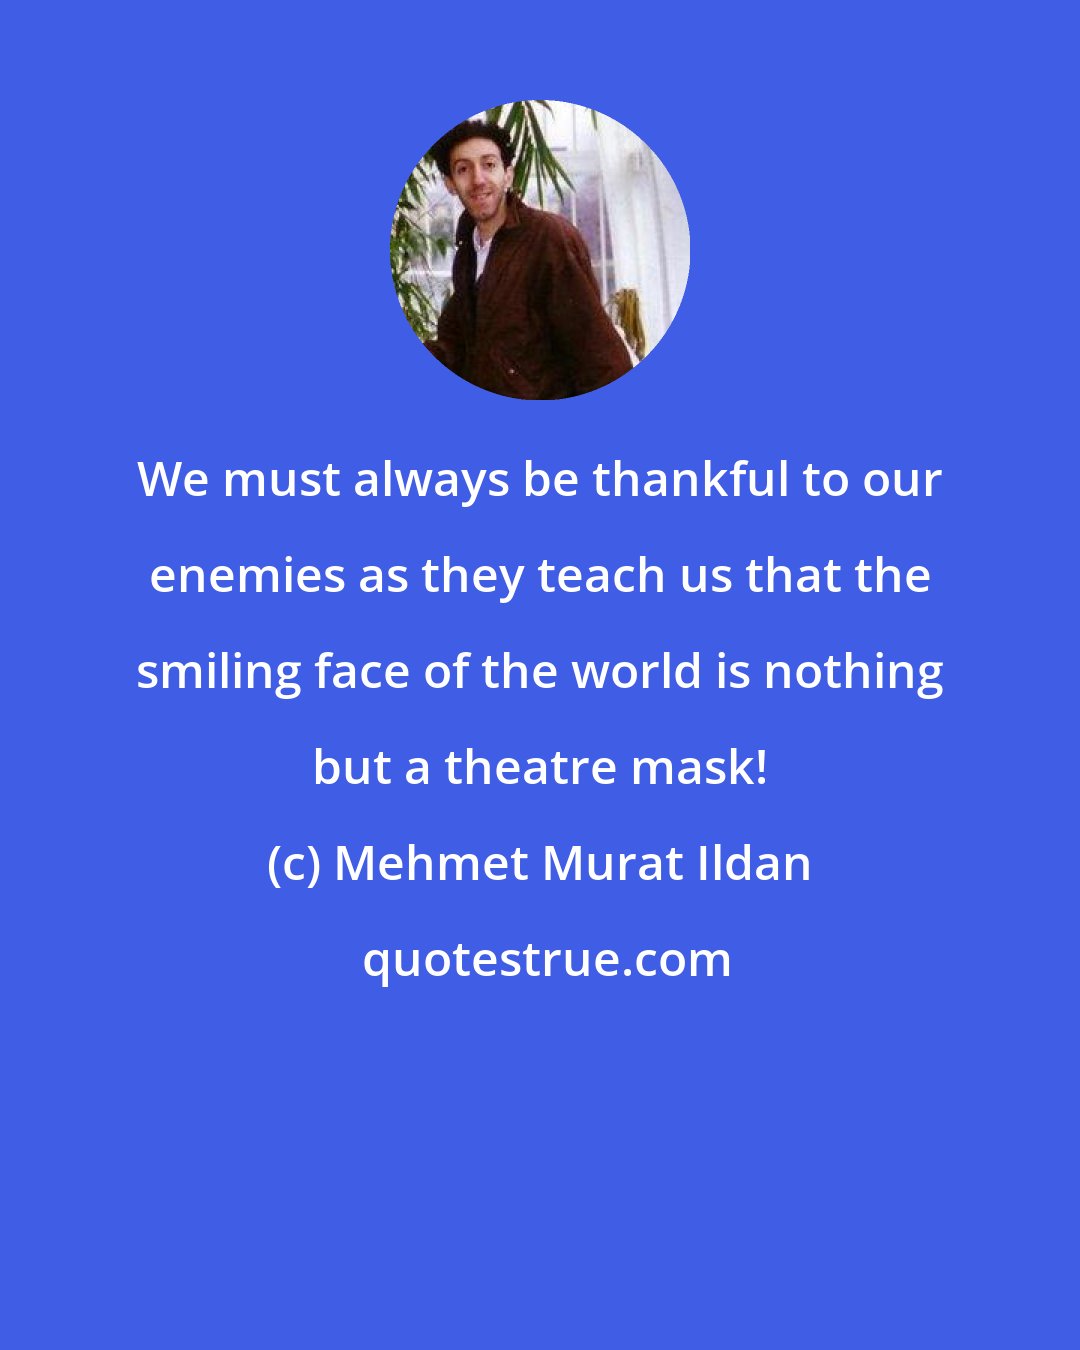 Mehmet Murat Ildan: We must always be thankful to our enemies as they teach us that the smiling face of the world is nothing but a theatre mask!